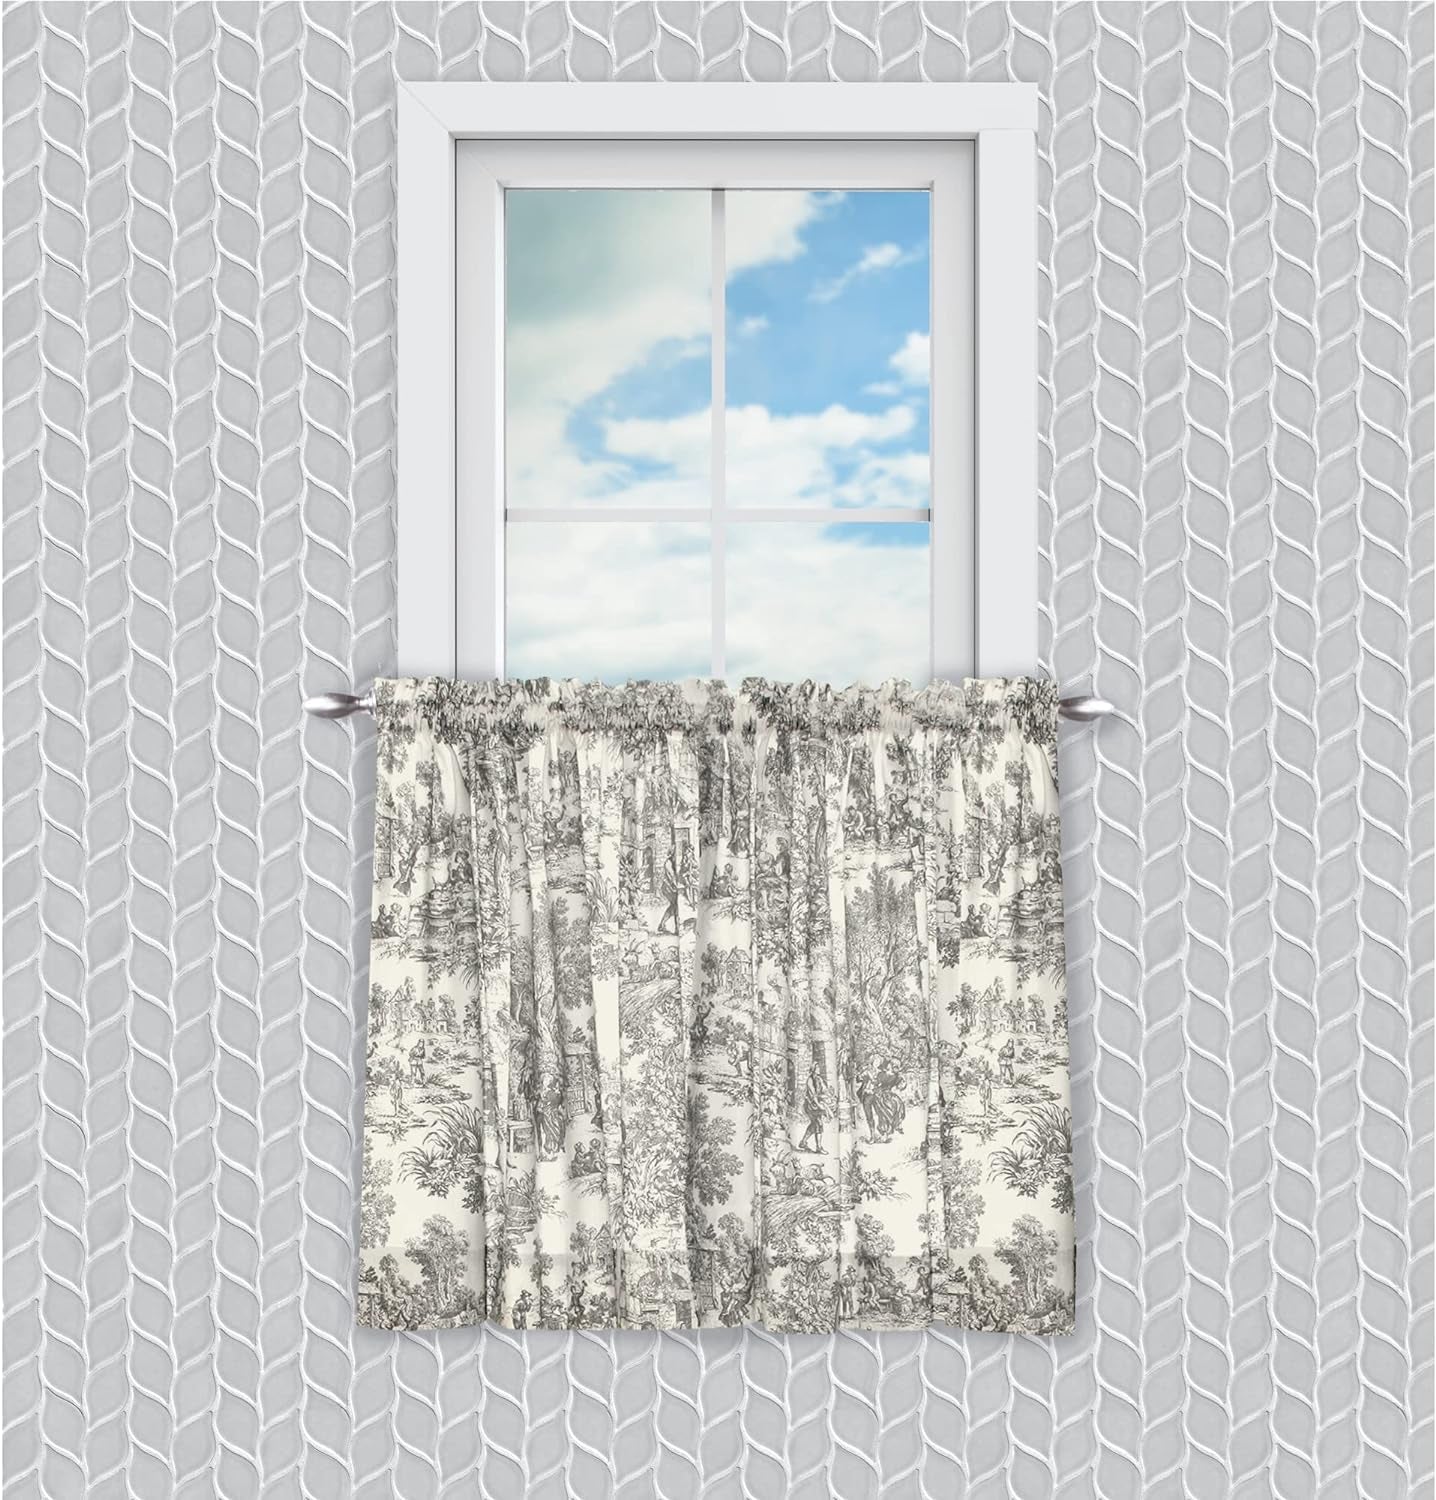 Ellis Curtain Victoria Park Toile 68-Inch-By-84 Inch Tailored Panel Pair with Tiebacks, Black  Ellis Curtain Grey 68X54" 